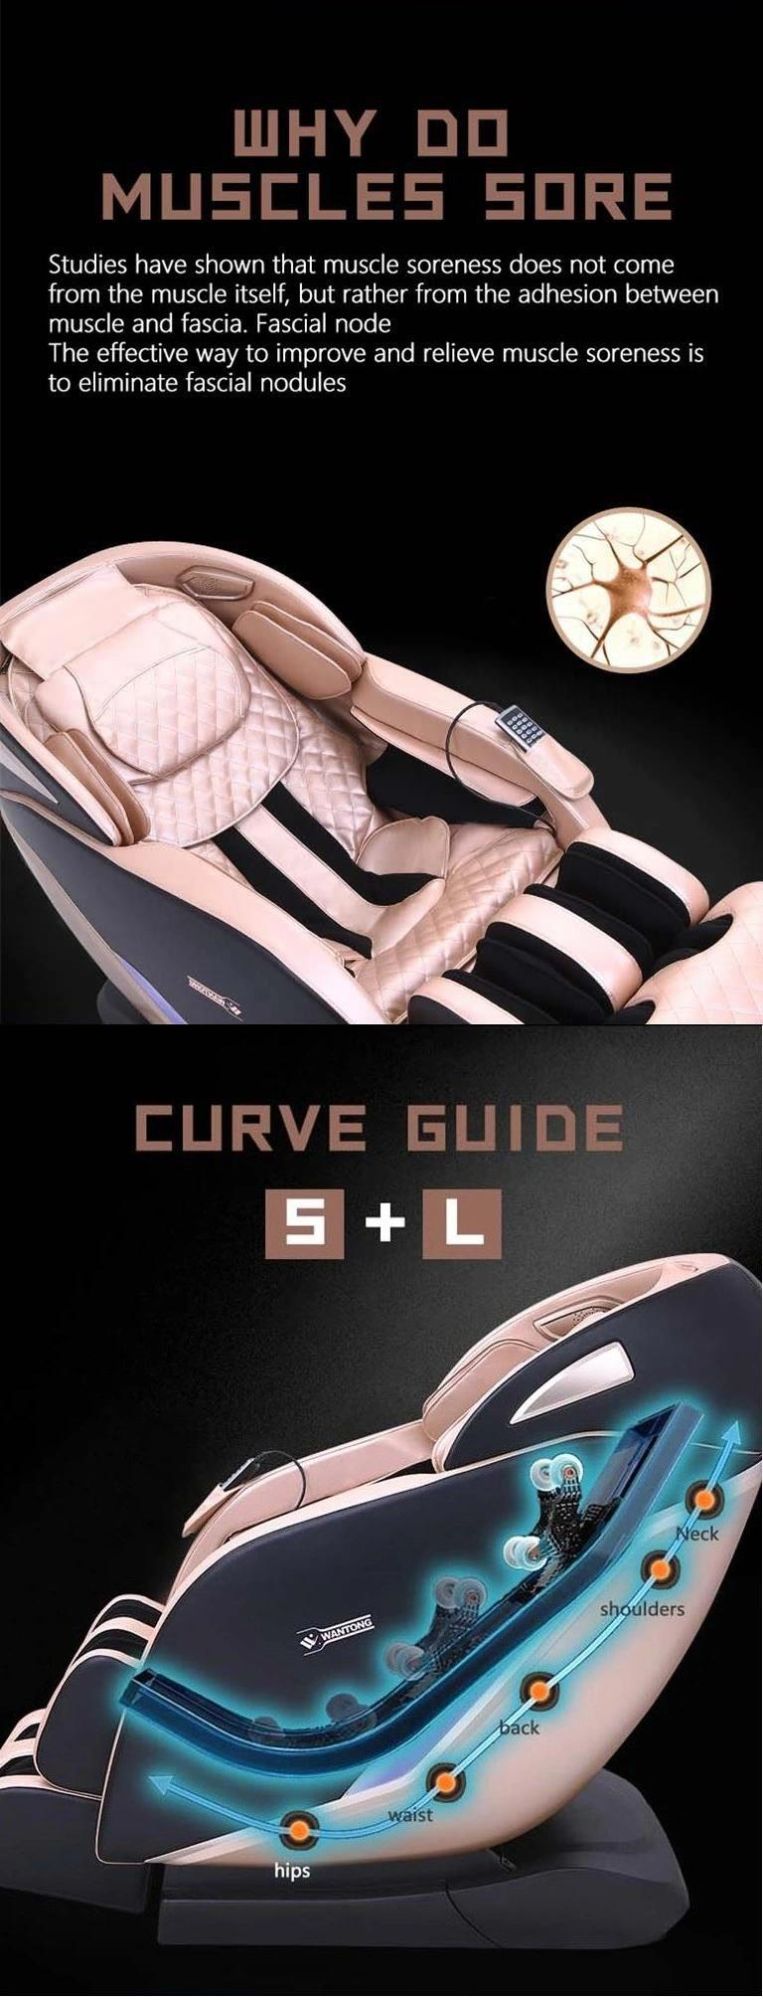 2021 Hot Sale Capsule Full Body Massager Home Office Use Automatic Shiatsu Kneading Electric Massage Chair